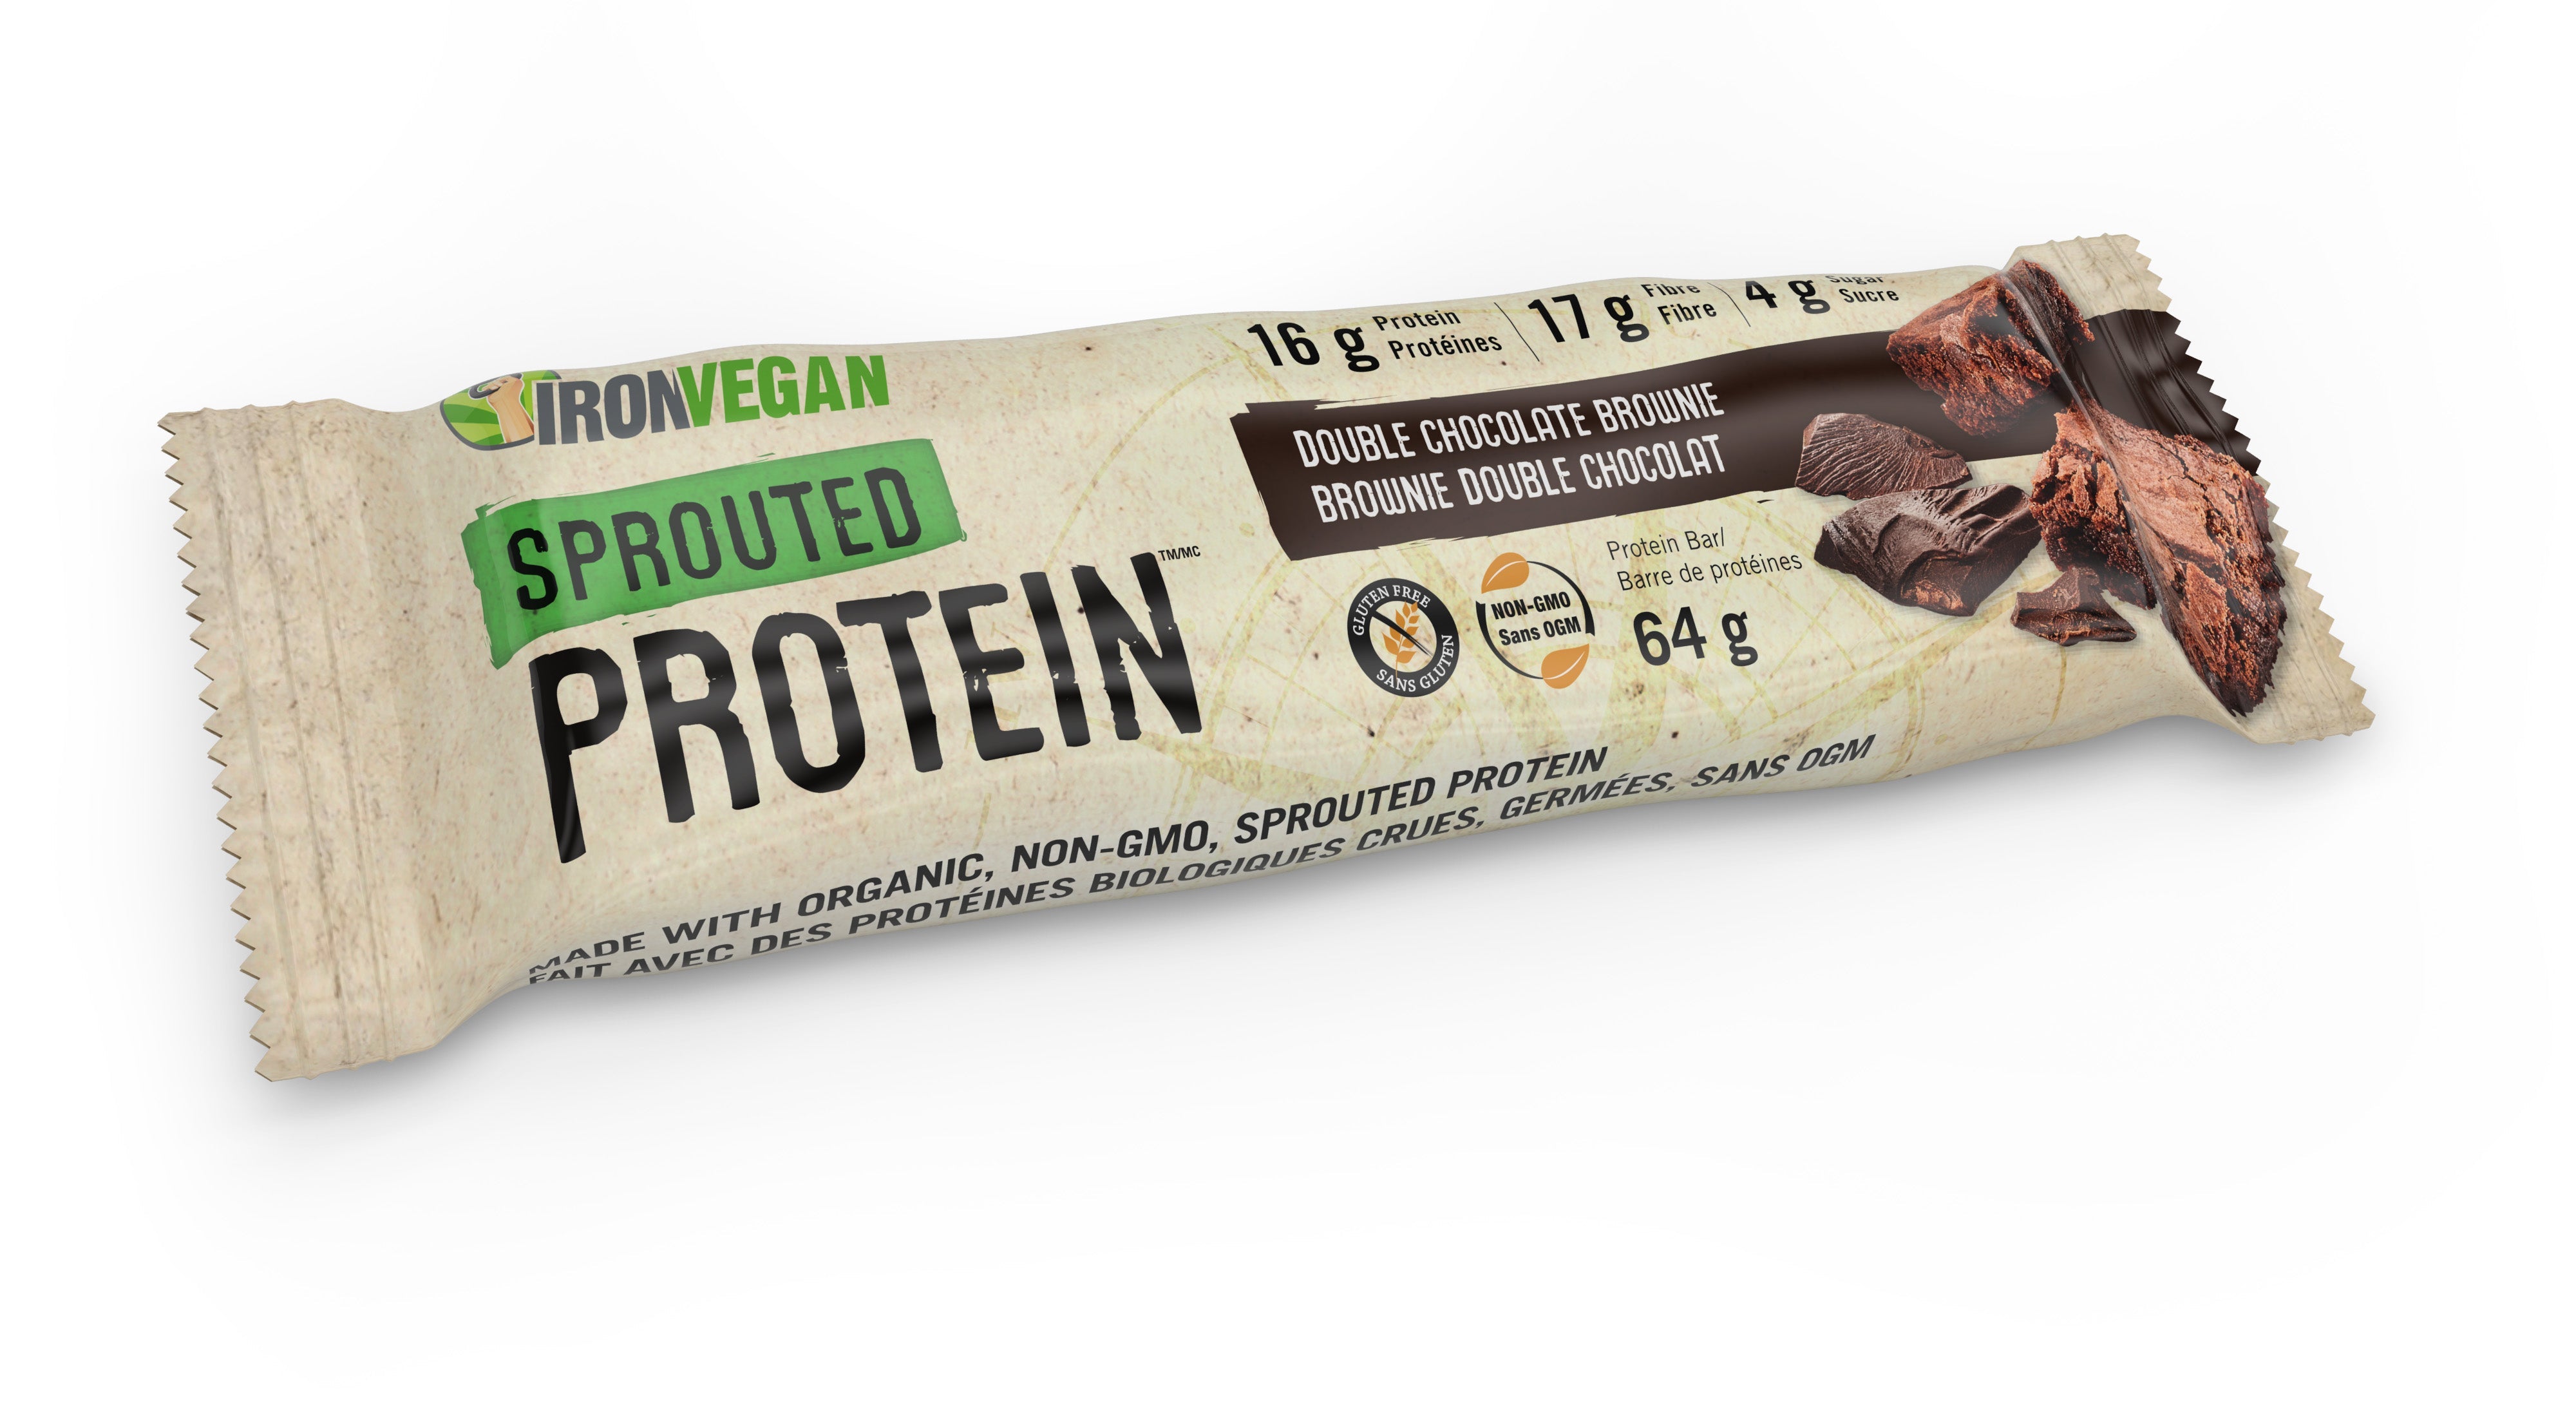 Double chocolate brownie protein bars (sprout) 12x64g